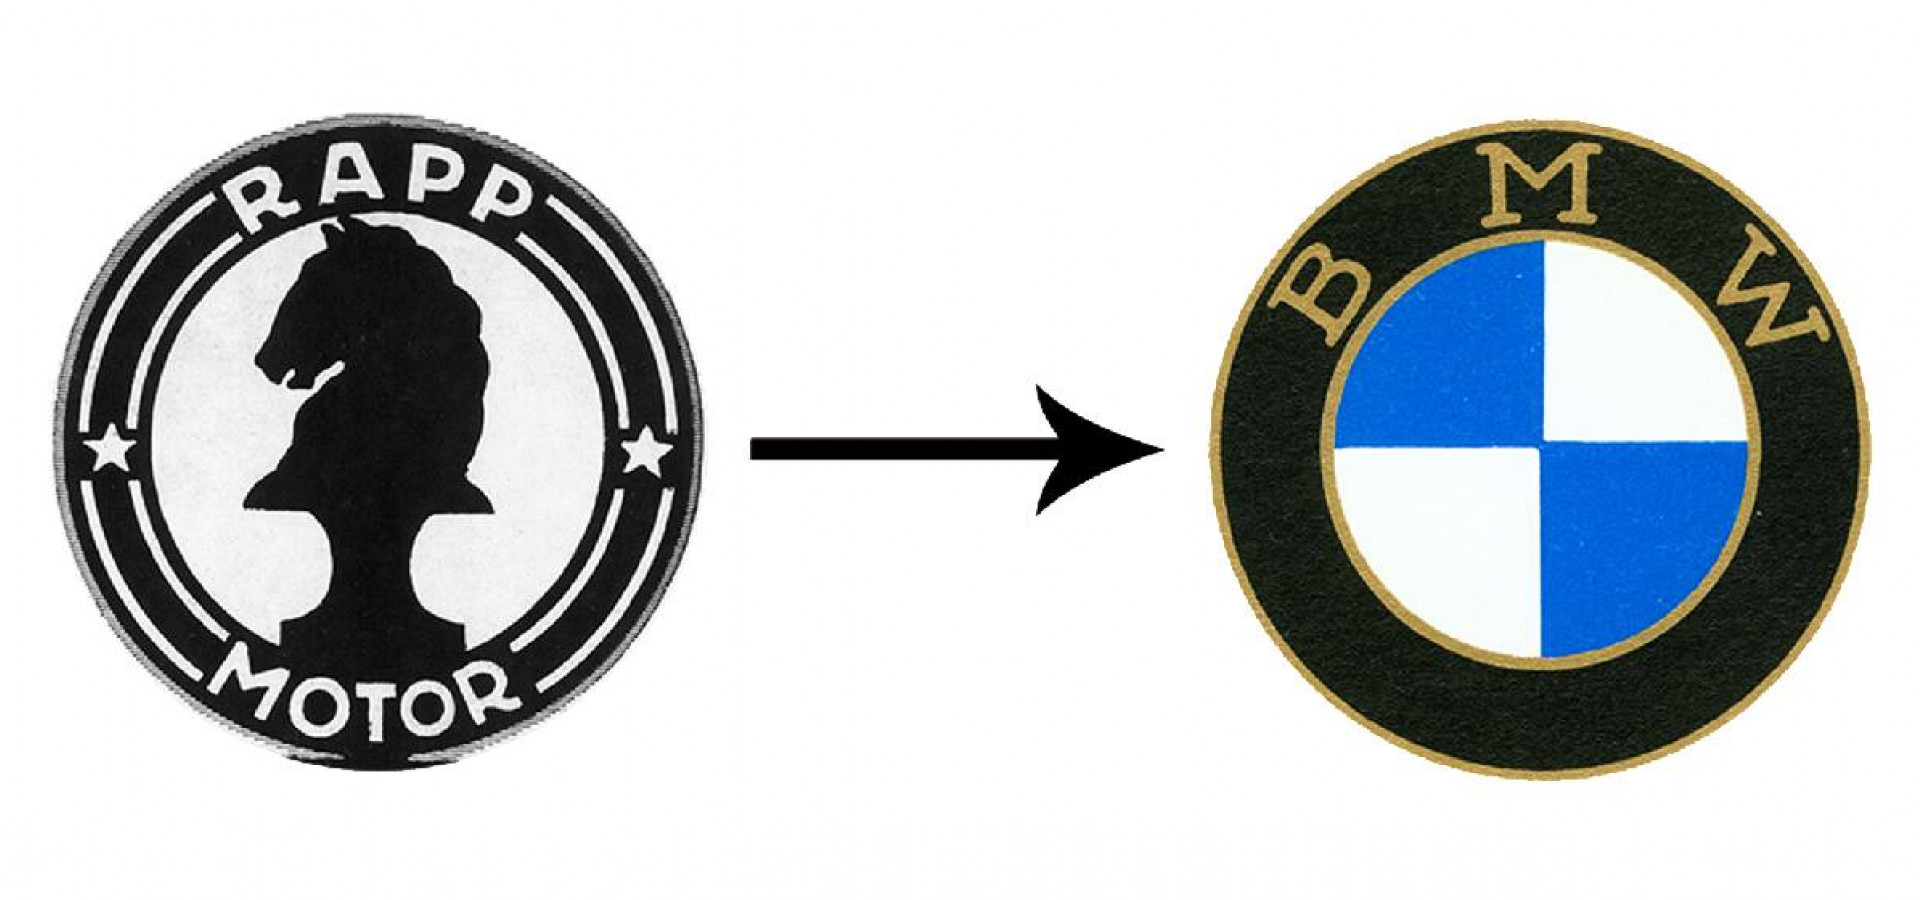 The BMW logo Meaning and history